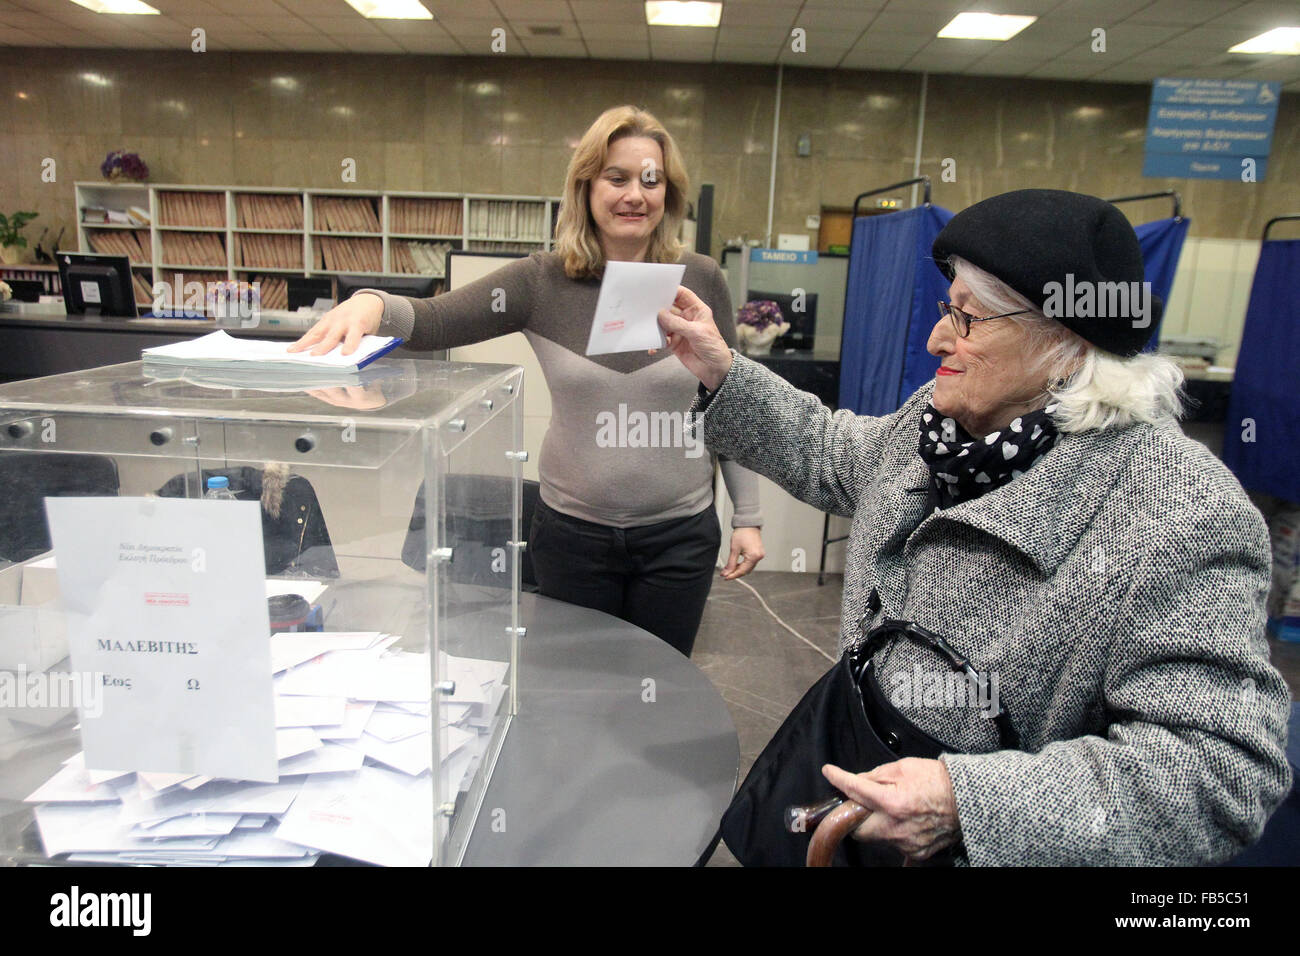 (160110) -- ATHENS, Jan. 10, 2016 (Xinhua) -- A voter casts a ballot inside a polling station at Kifissia suburb, north of Athens, on Sunday, Jan. 10, 2016. Greece's main opposition conservative New Democracy party conducted a nationwide voting to elect a new leader. (Xinhua/Marios Lolos) Stock Photo